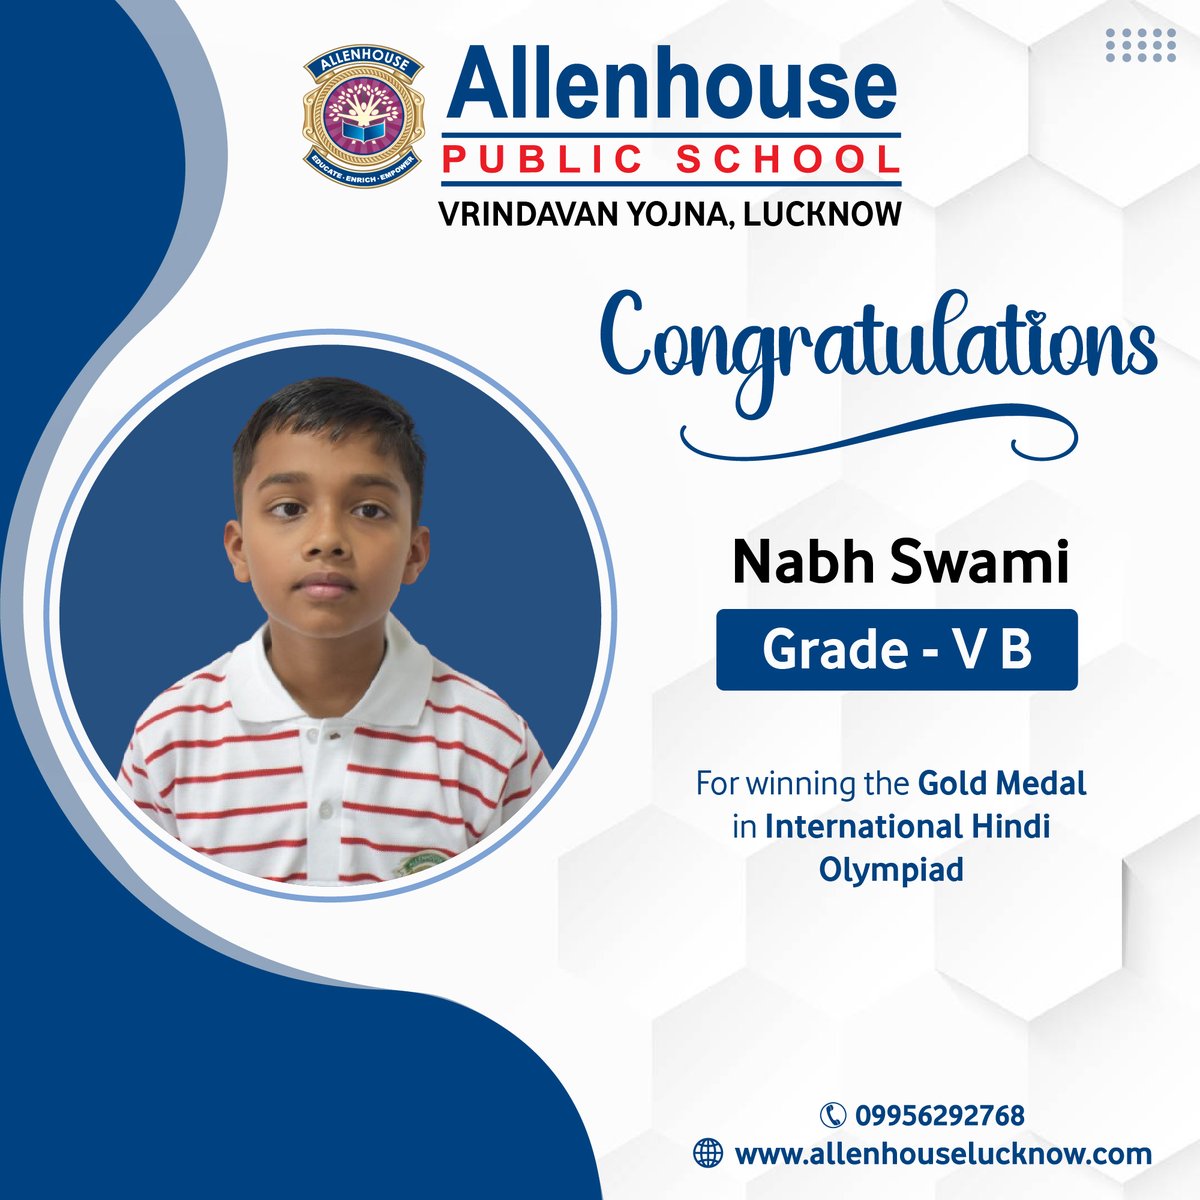 📷'Just clinched Gold at the International Hindi Olympiad!' 📷
…nhouselucknow.admission-enquiries.com/Site/Admission…
#GoldMedal #HindiChampion #AllenHousePublicSchool #allenhousepublicschoollucknow #Allenhousegroup #bestschoolinindia #BestCBSESchoolinup #admissionsopen #Bestschoolinlucknow #Top10School